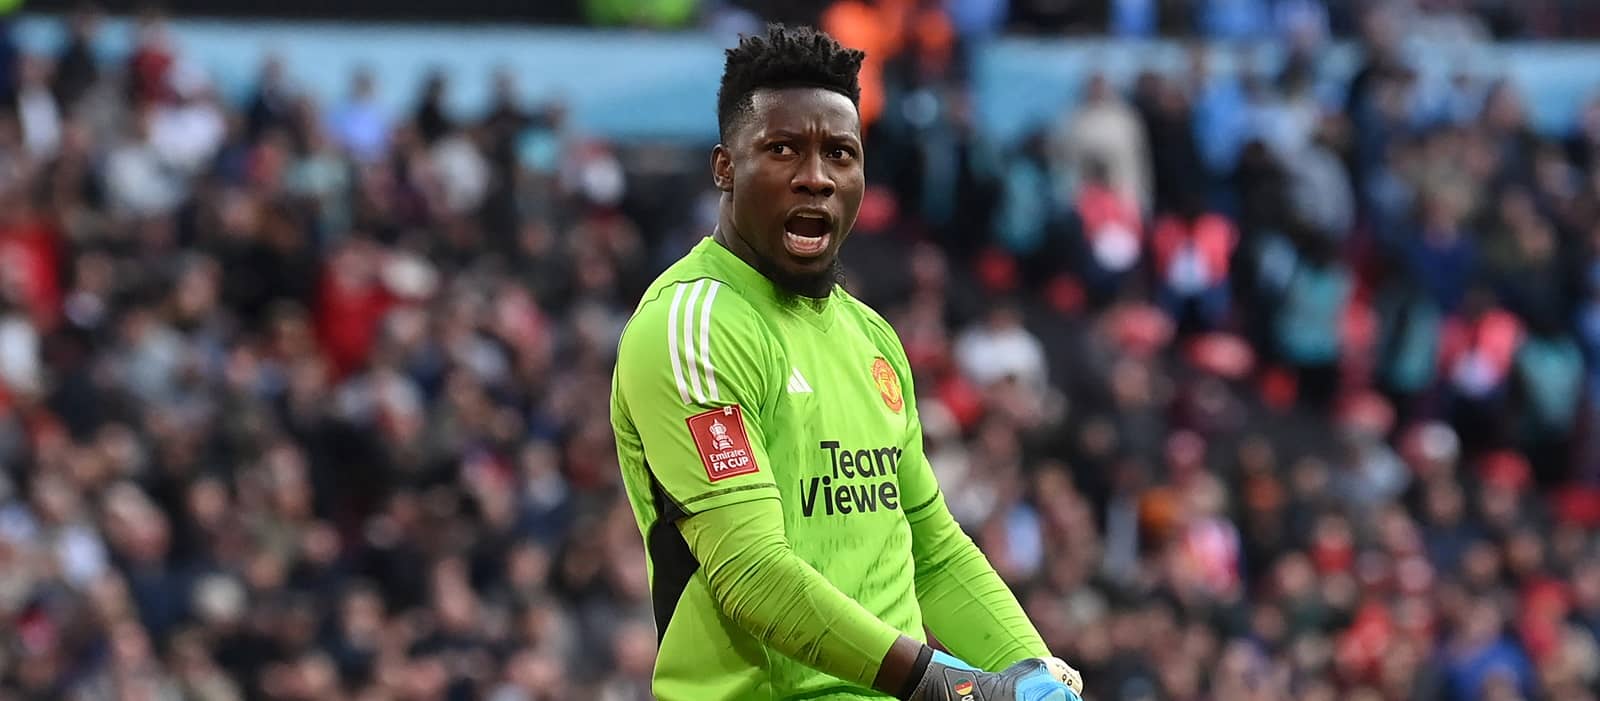 Andre Onana claims next season is about revenge for him after last season’s struggles